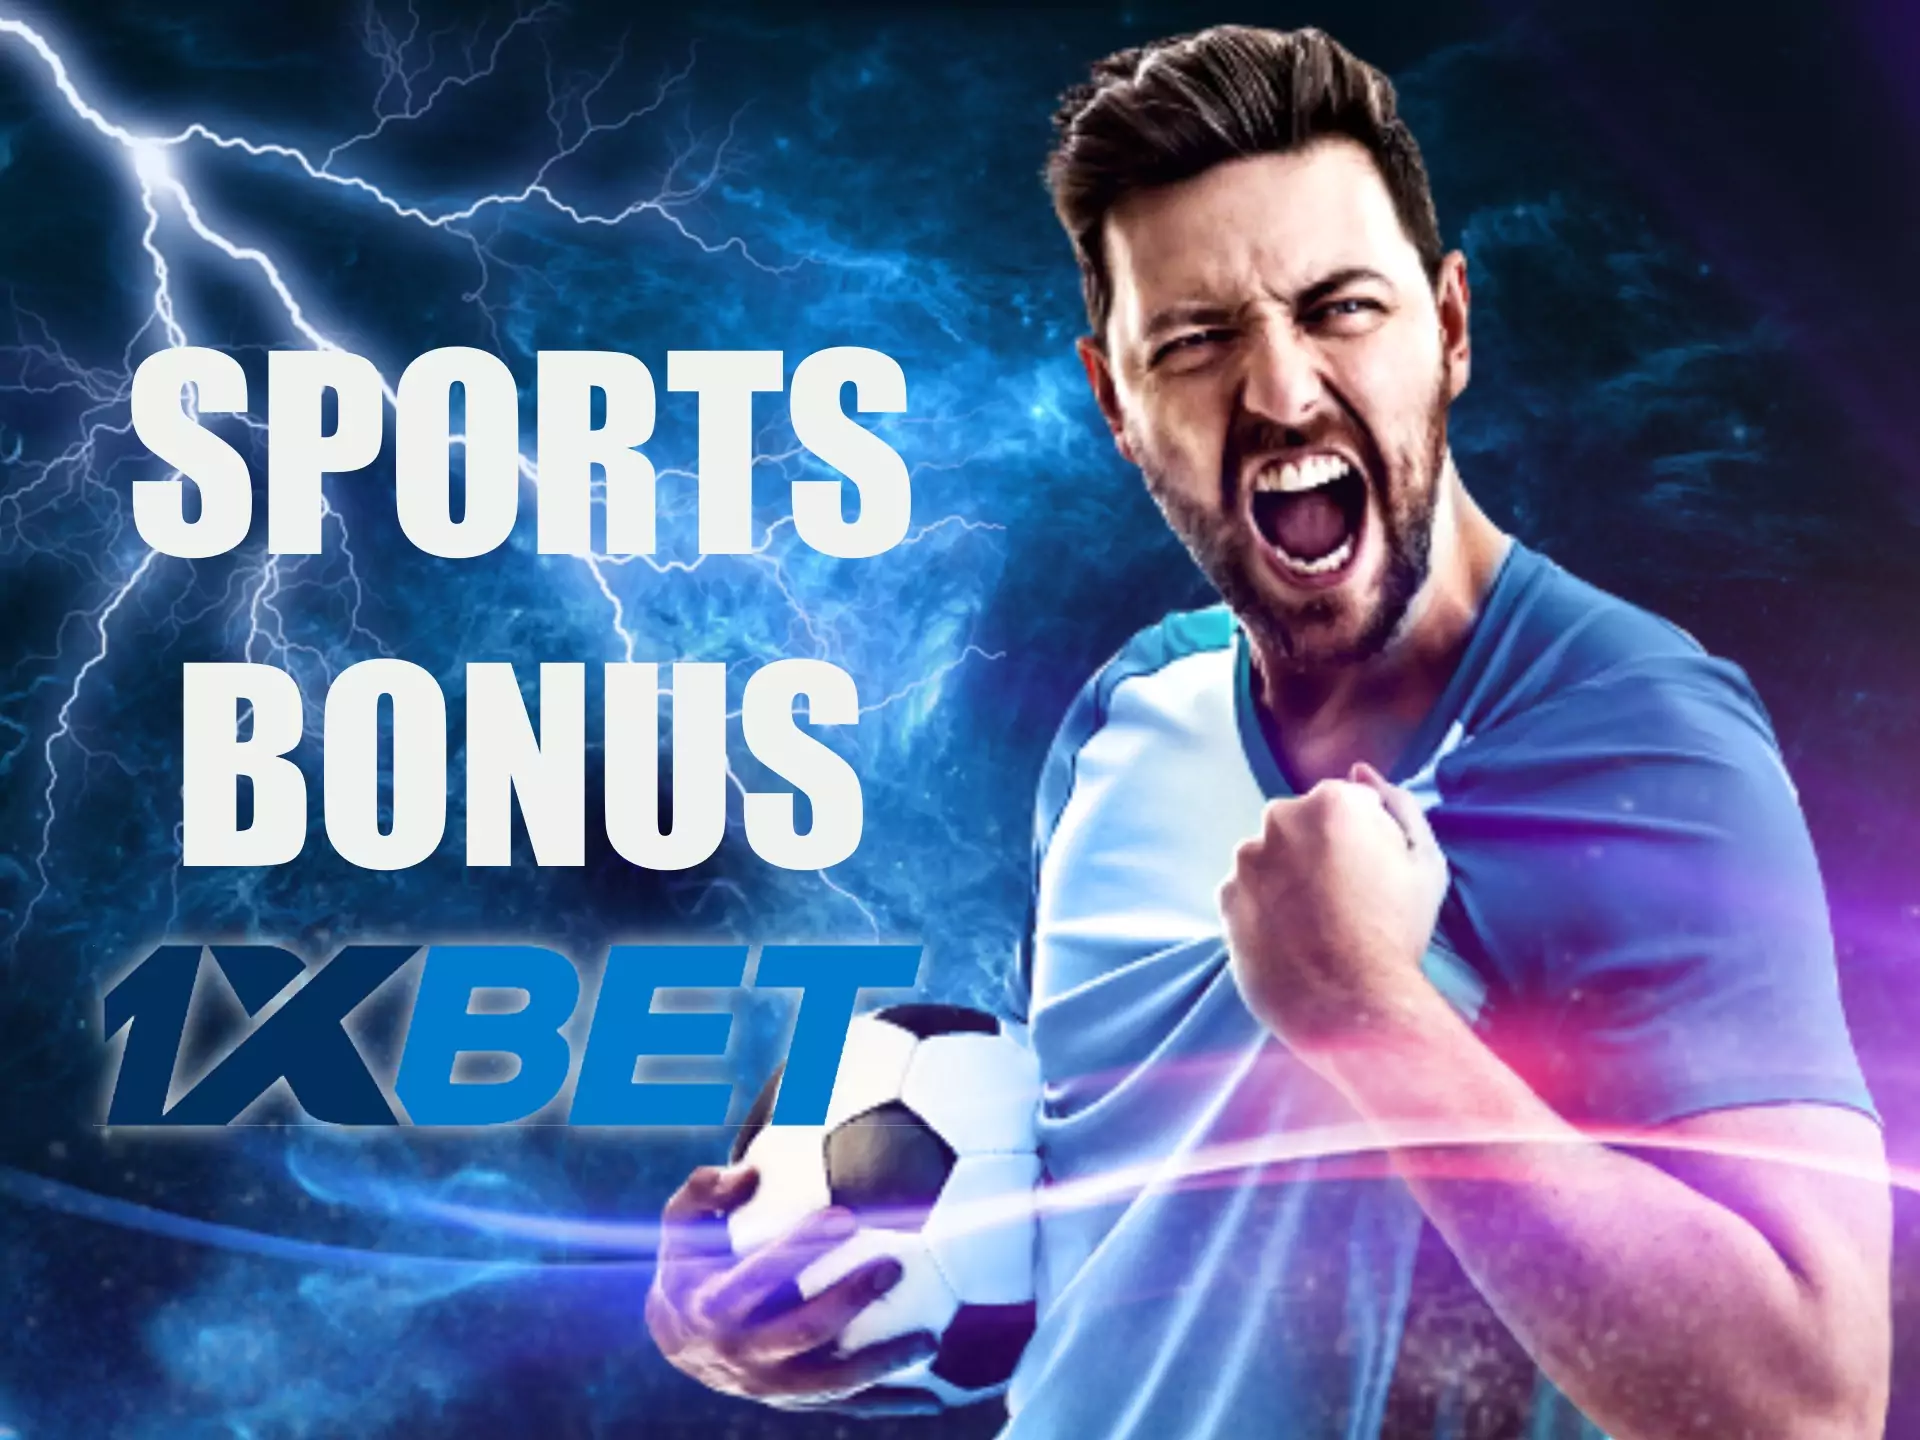 1xbet offers a great bonus on sport betting for new players.